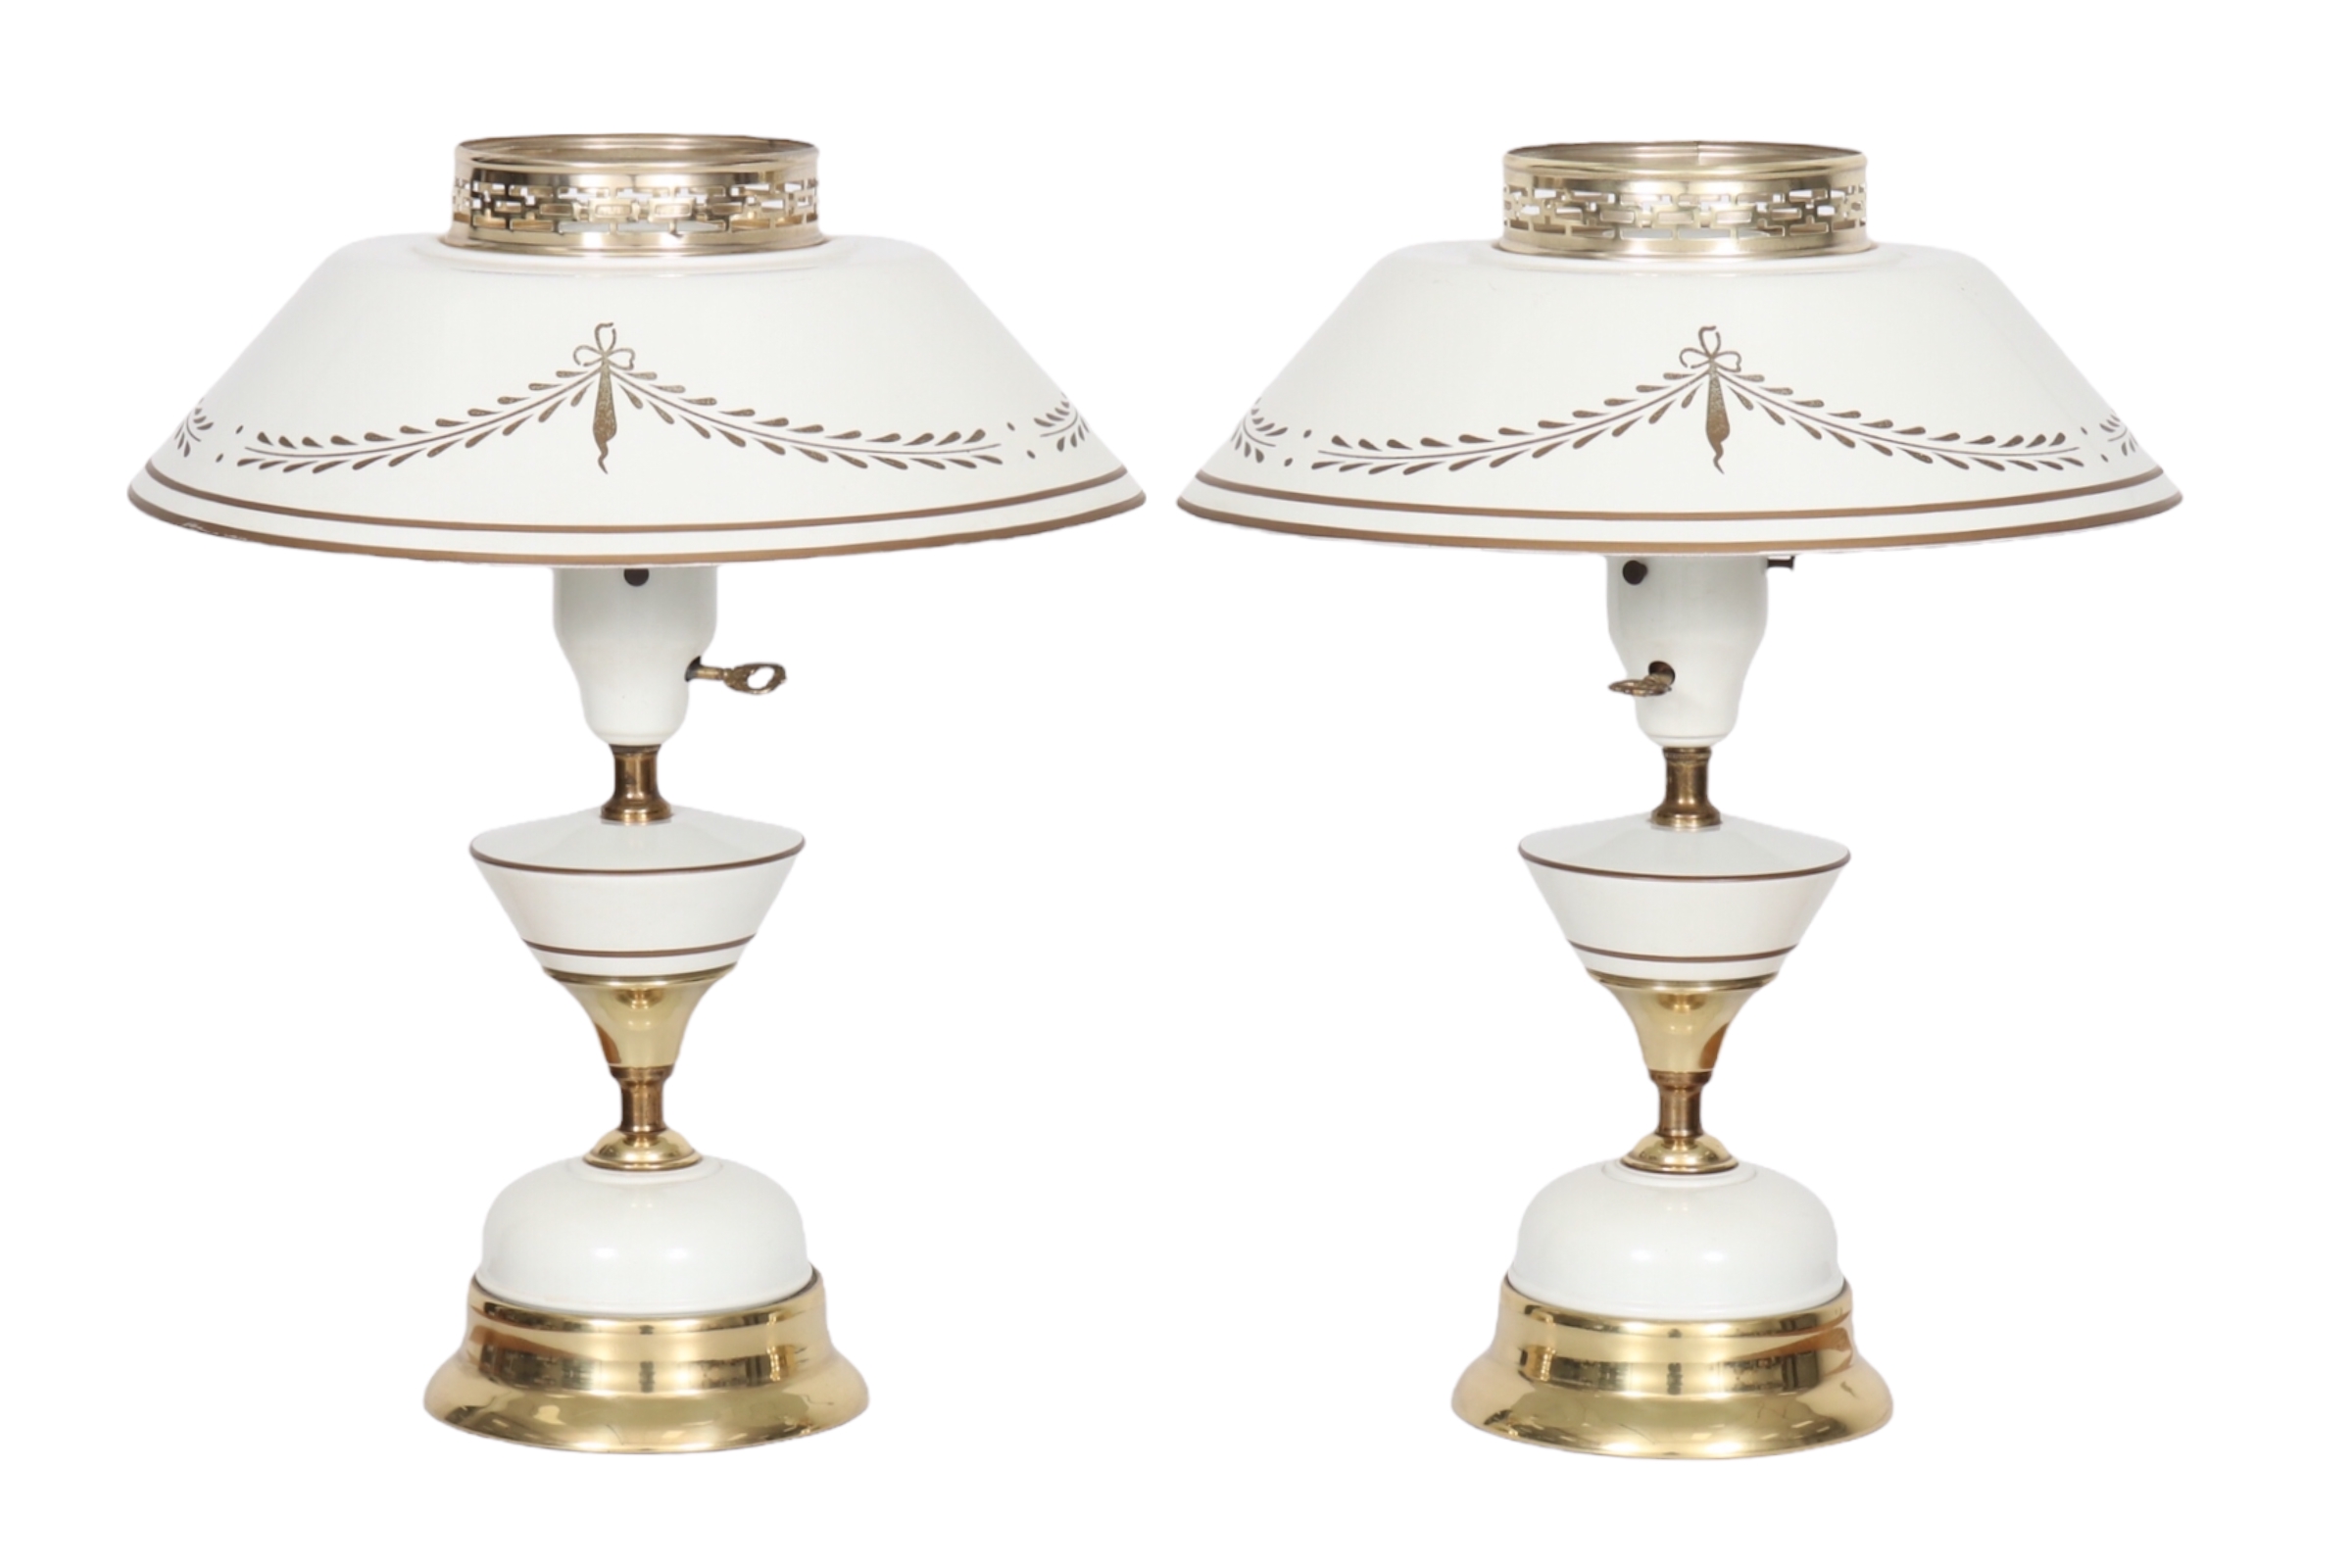 White & Gold Regency Table Lamps, a Pair~P77666304